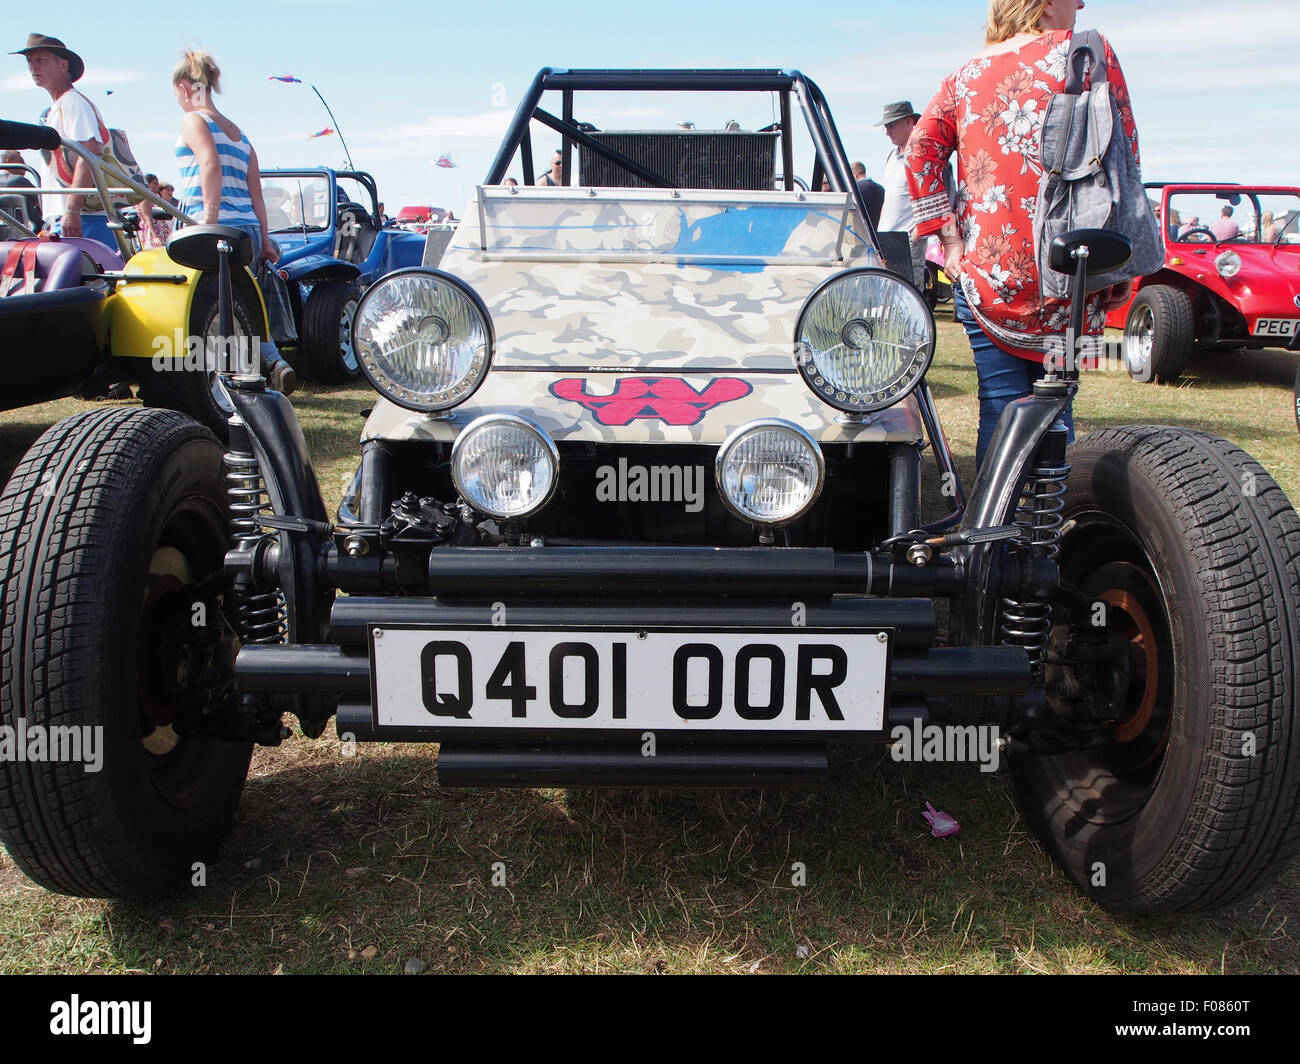 A customised road worthy beach buggy on display at a vehicle rally Stock Photo